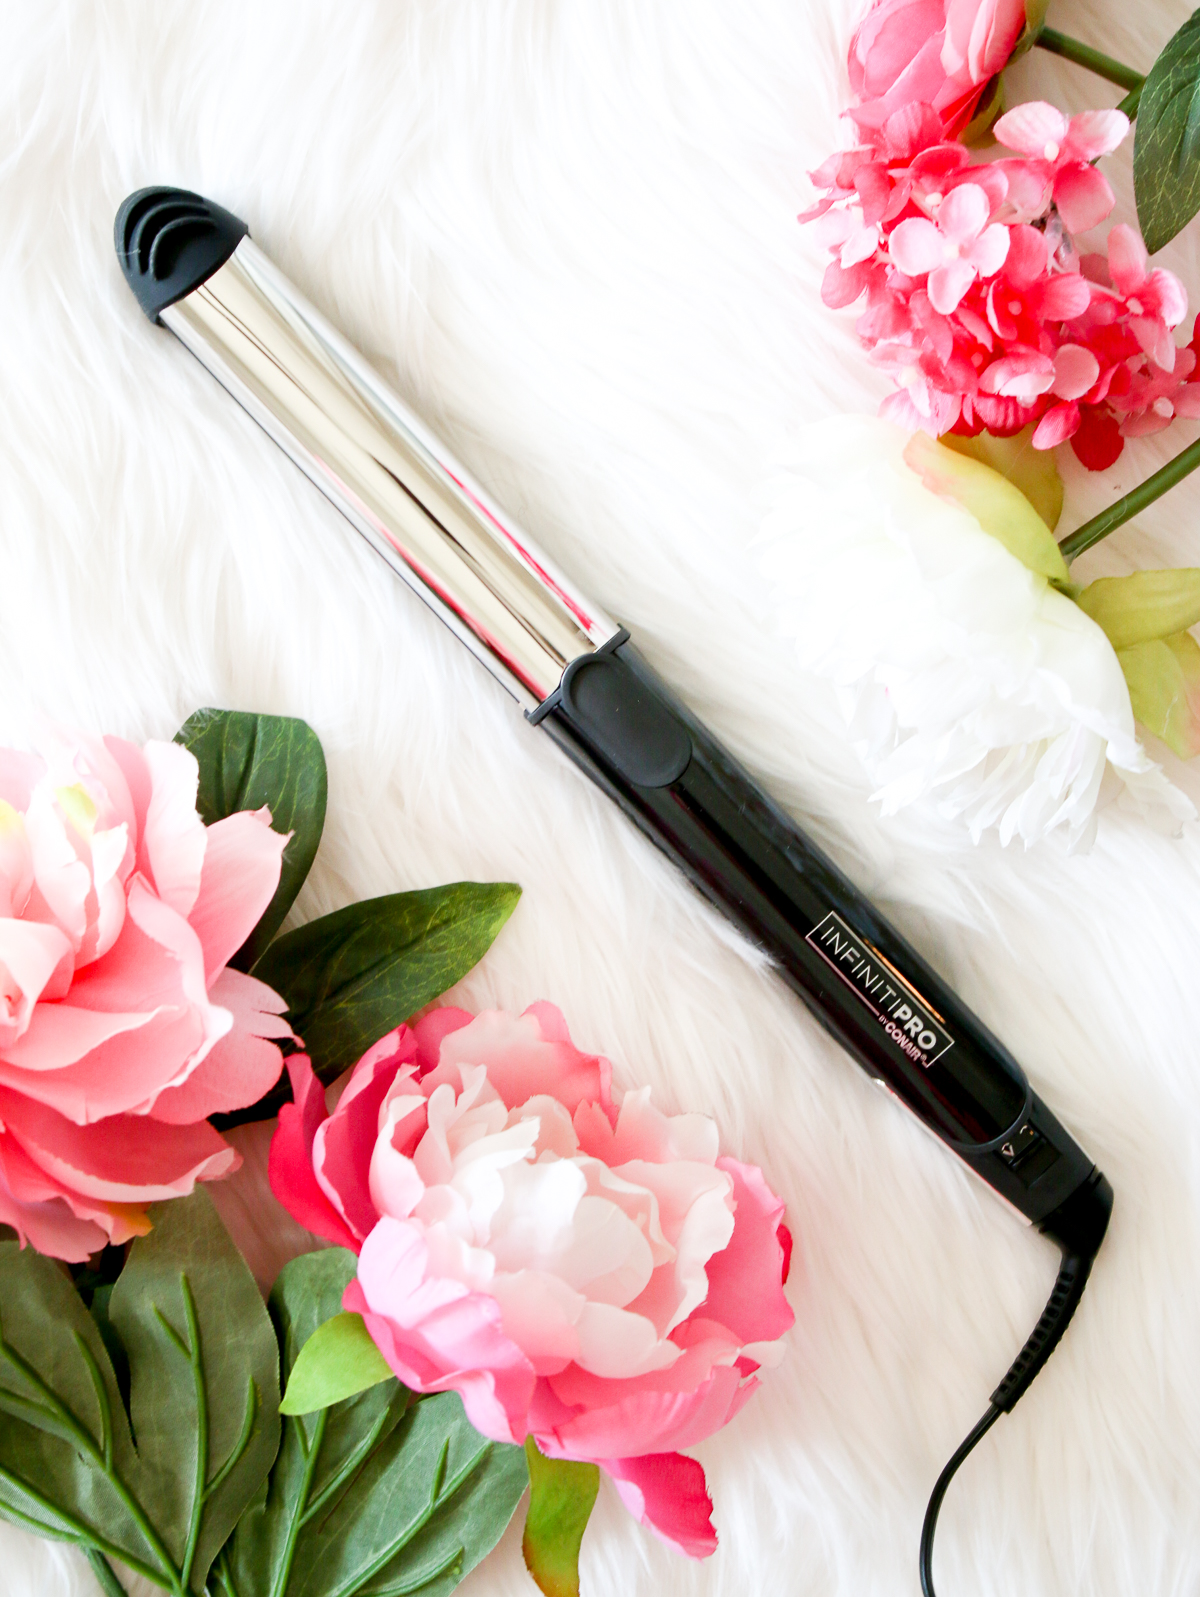 Conair 3Q blow dryer and Conair 2-in-1 styler review | How to use the InfinitiPRO by Conair 2-in-1 Styler | How to use the InfinitiPRO by Conair 3Q Compact Styler | The best blow dryer for thick coarse hair and best 2-in-1 styler from Conair | Conair's best hair styling tools for women | The Countdown to Styling: 2 Conair Styling tools Every Girl Needs to Try by blogger and retired beauty queen Stephanie Ziajka from Diary of a Debutante